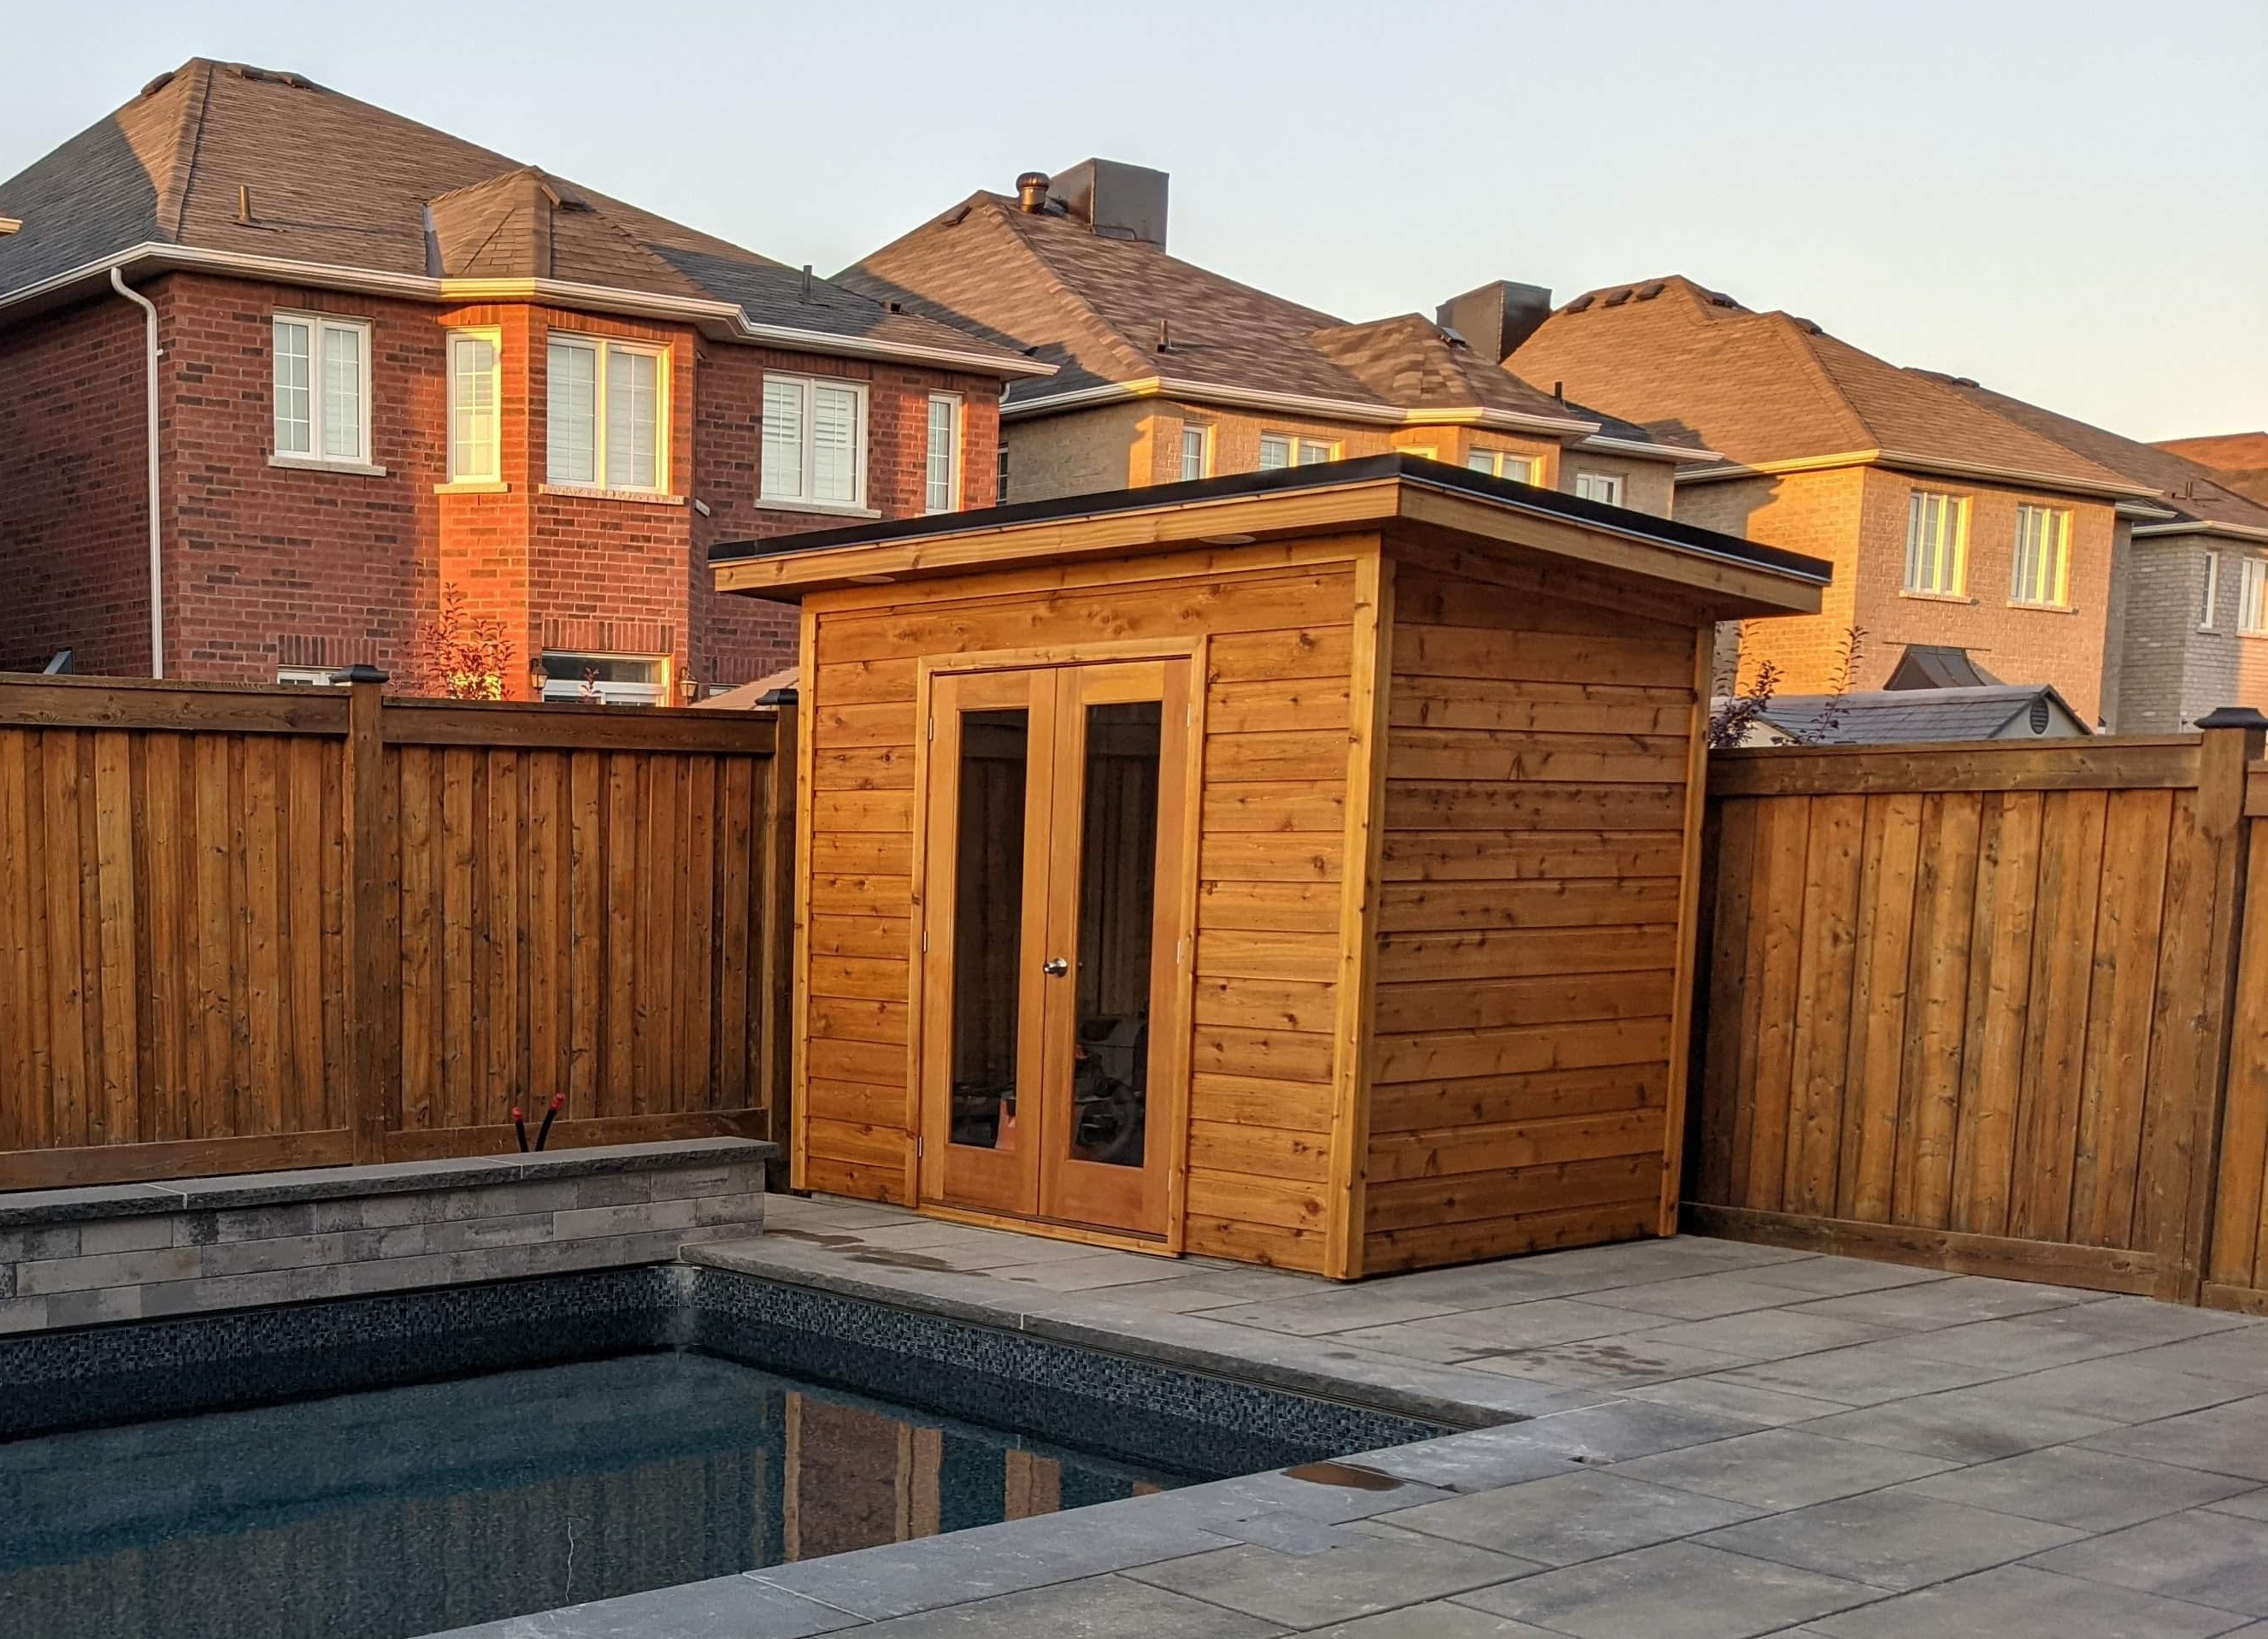 Front view of 6' x 9' Urban Studio Pool Cabana located in Ajax, Ontario – Summerwood Products